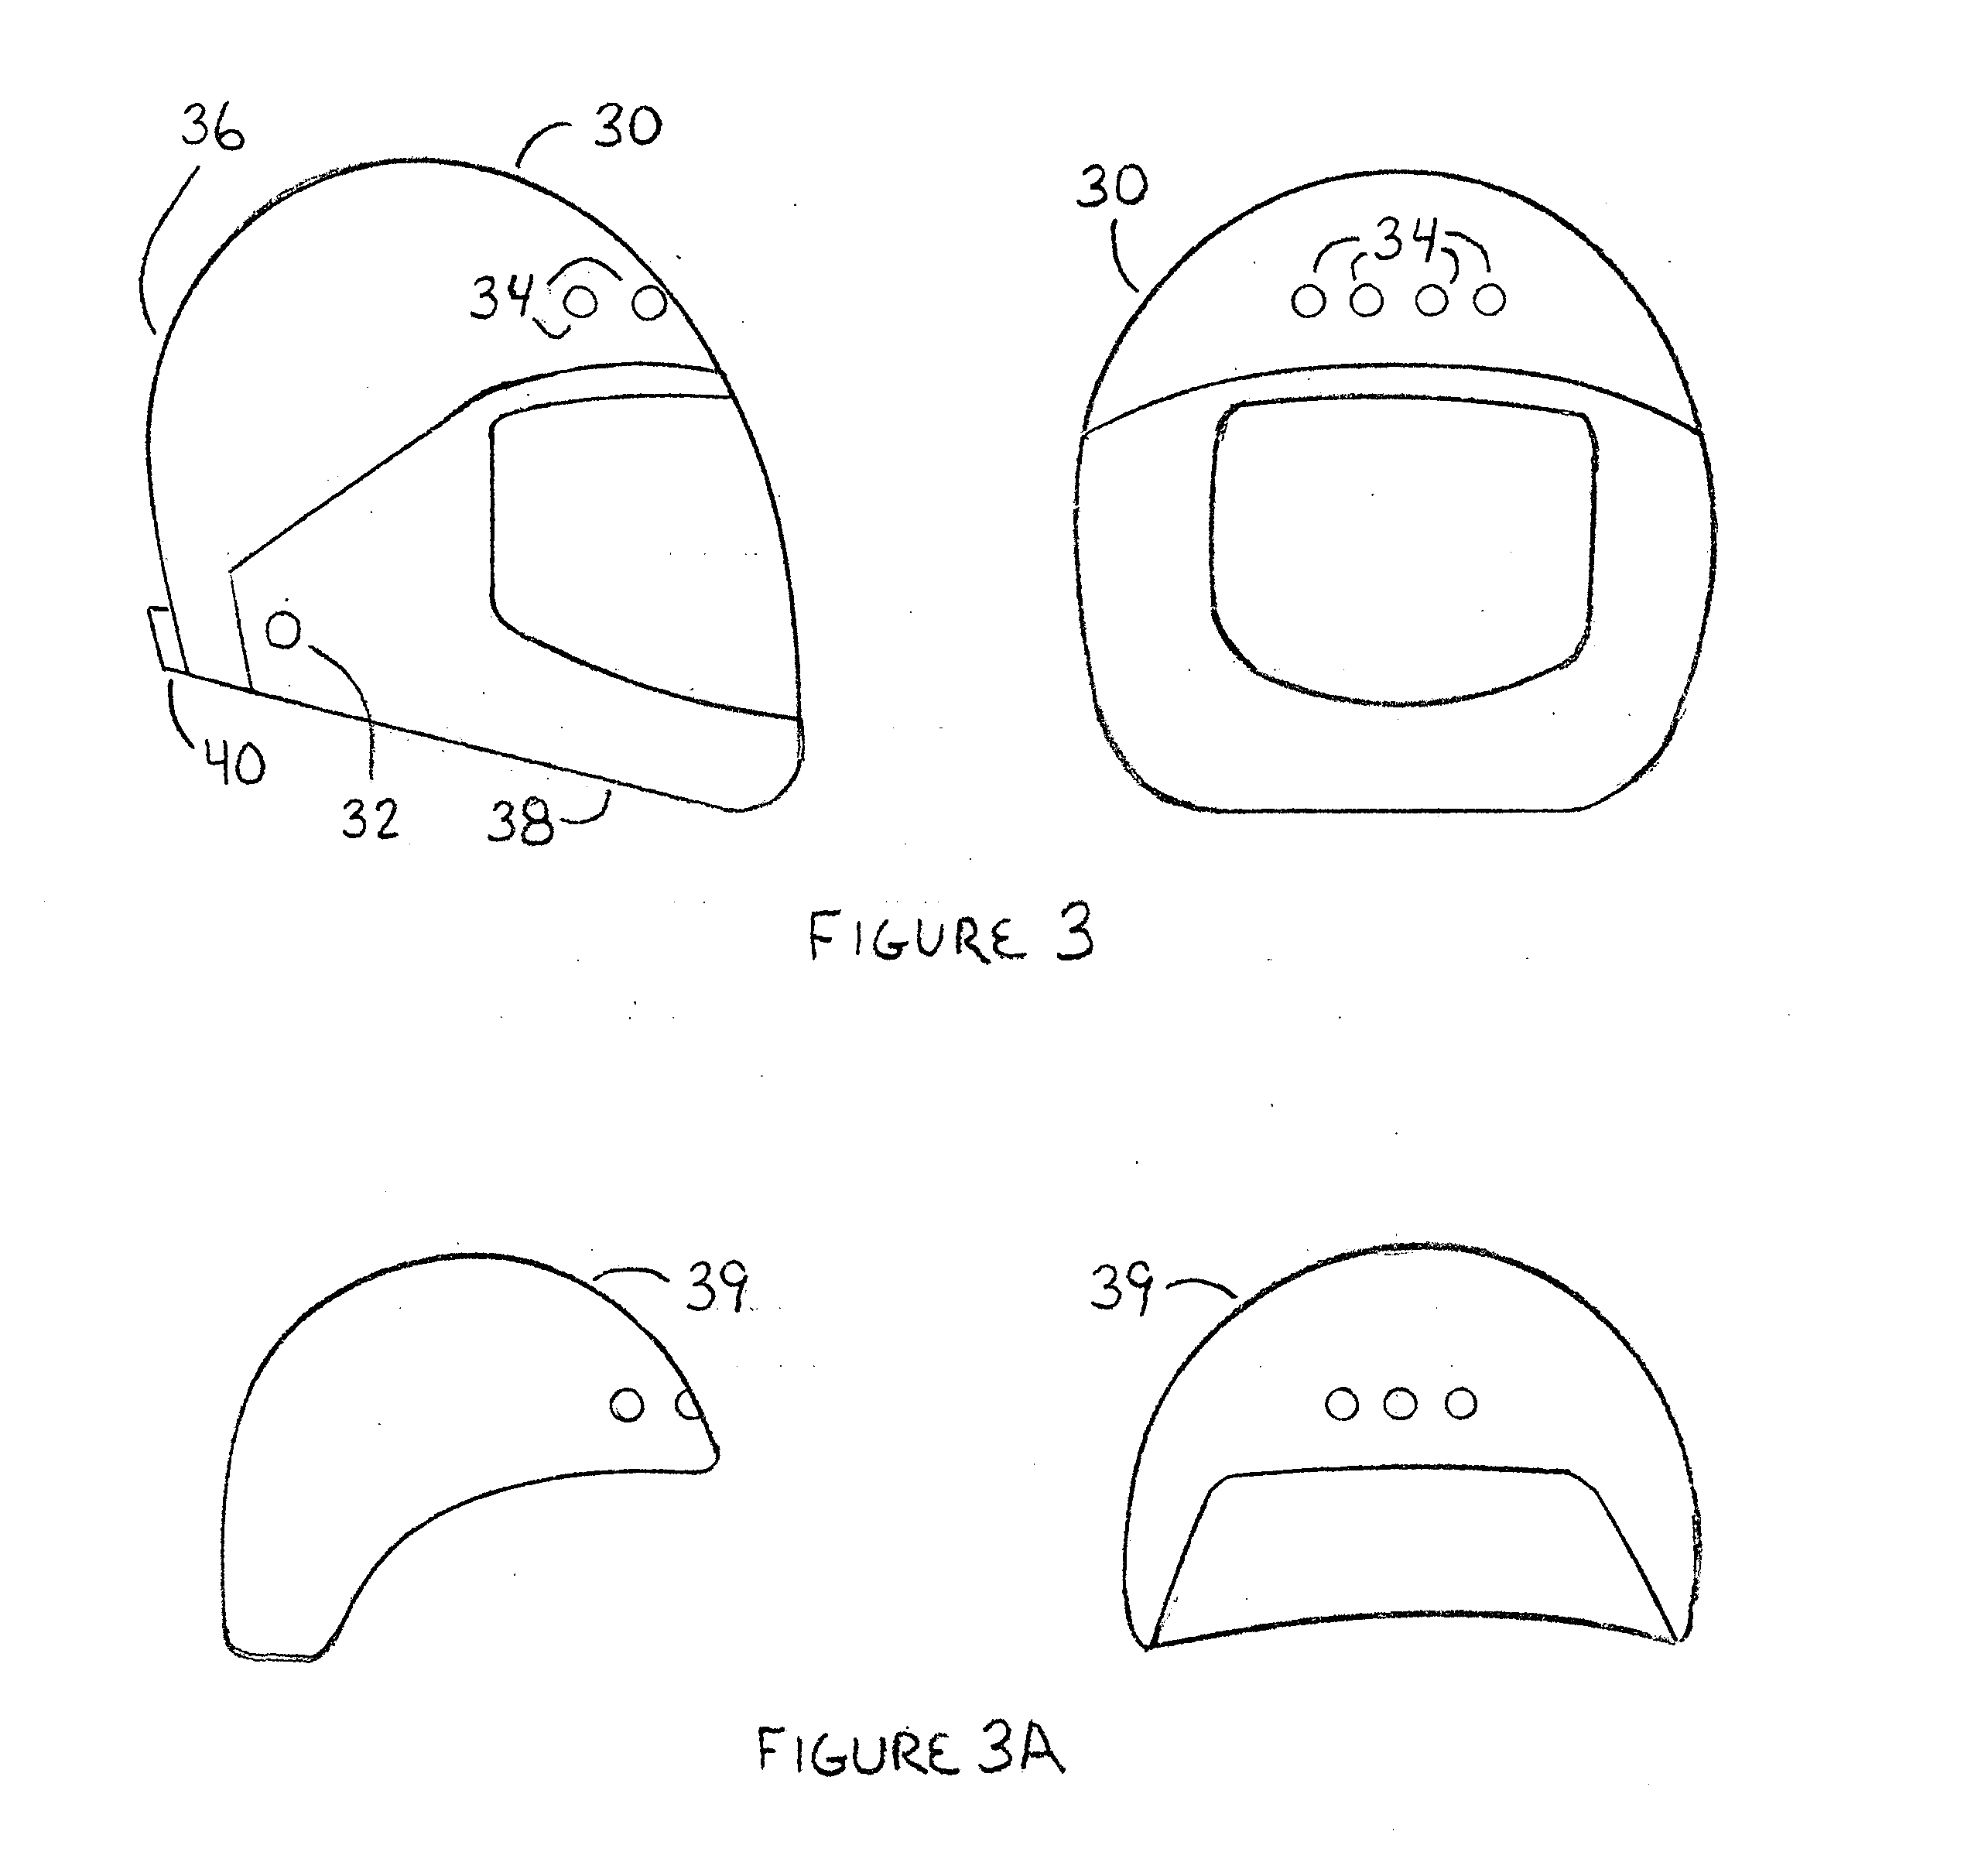 Motorcycle helmet with increased visibility